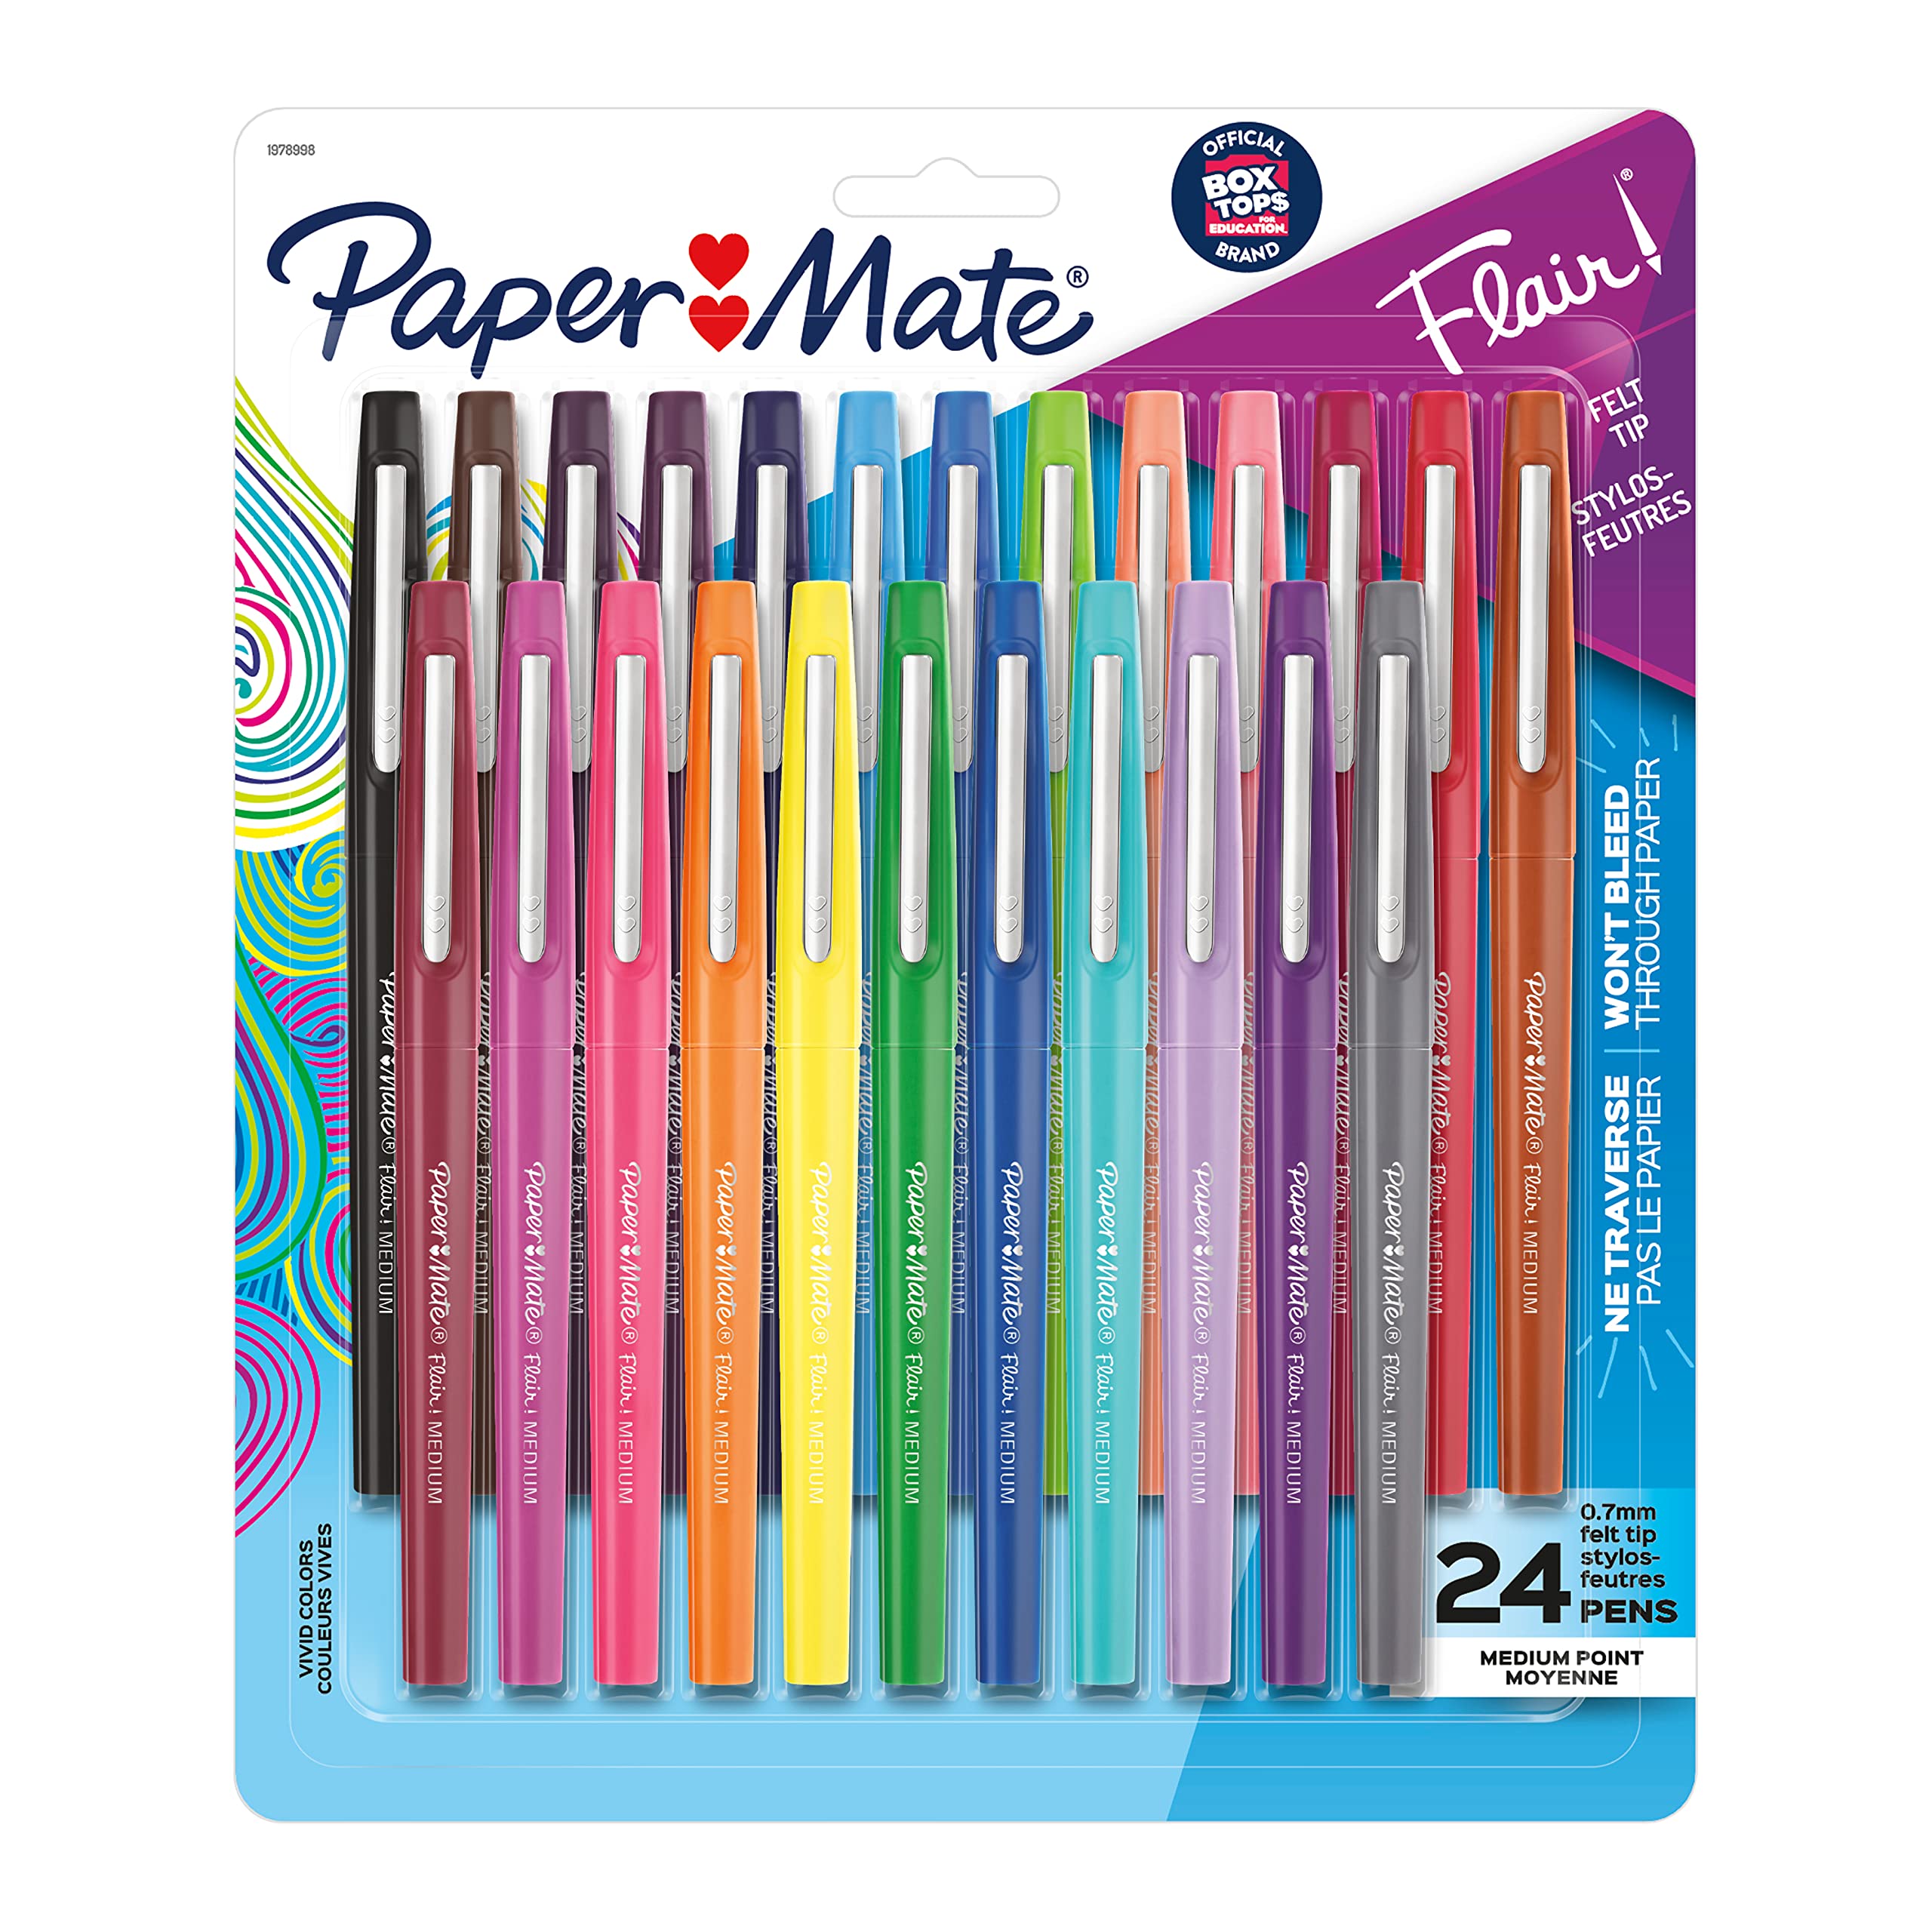 Paper Mate Flair Felt Tip Pens | Medium Point 0.7 Millimeter Marker Pens | Back to School Supplies for Teachers & Students | Assorted Colors, 24 Count on Sale At Amazon - Back To School Deal